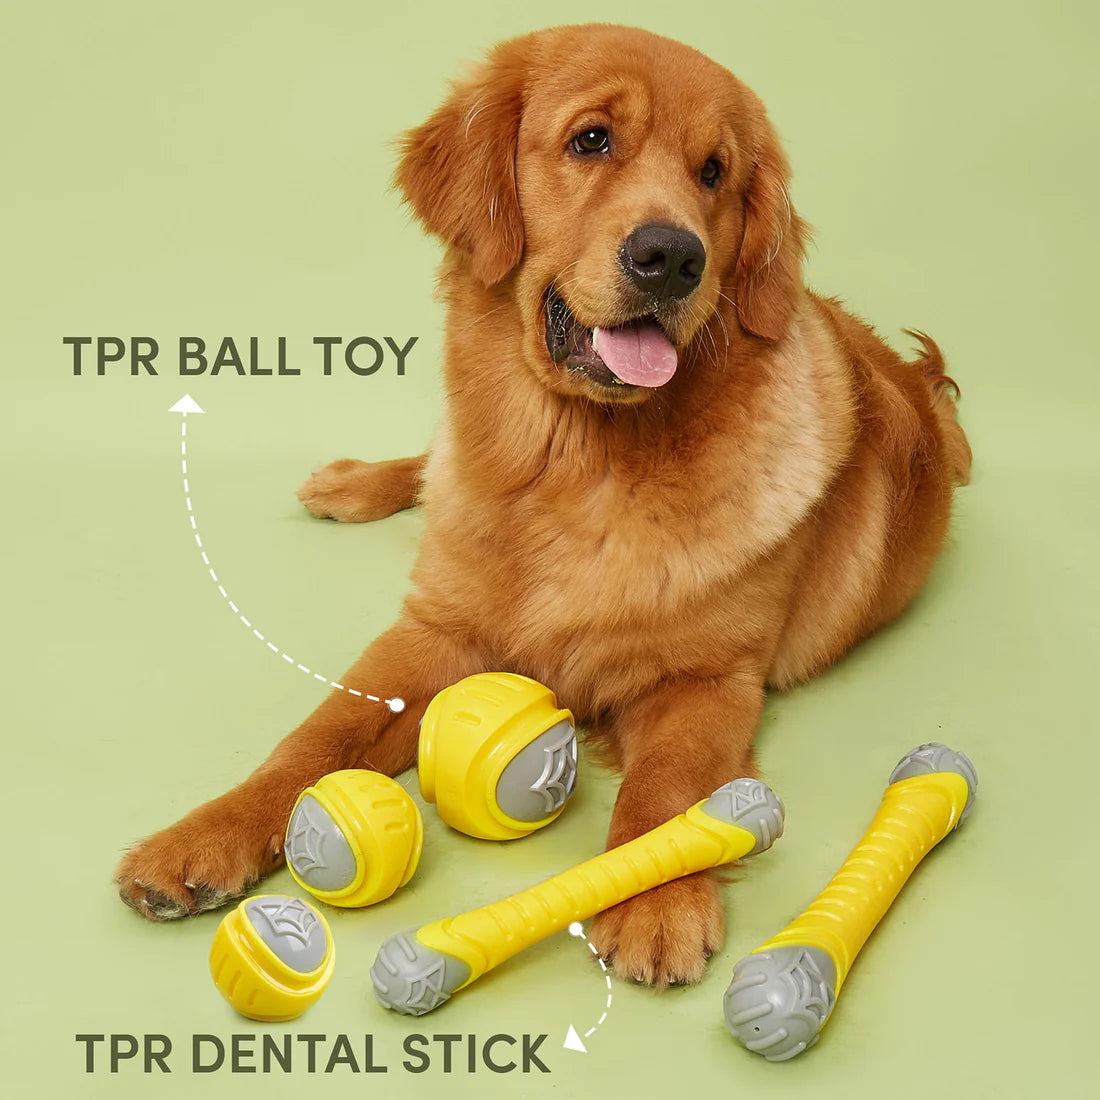 Fofos - Flexy Bone Durable Chew Toy For Dogs